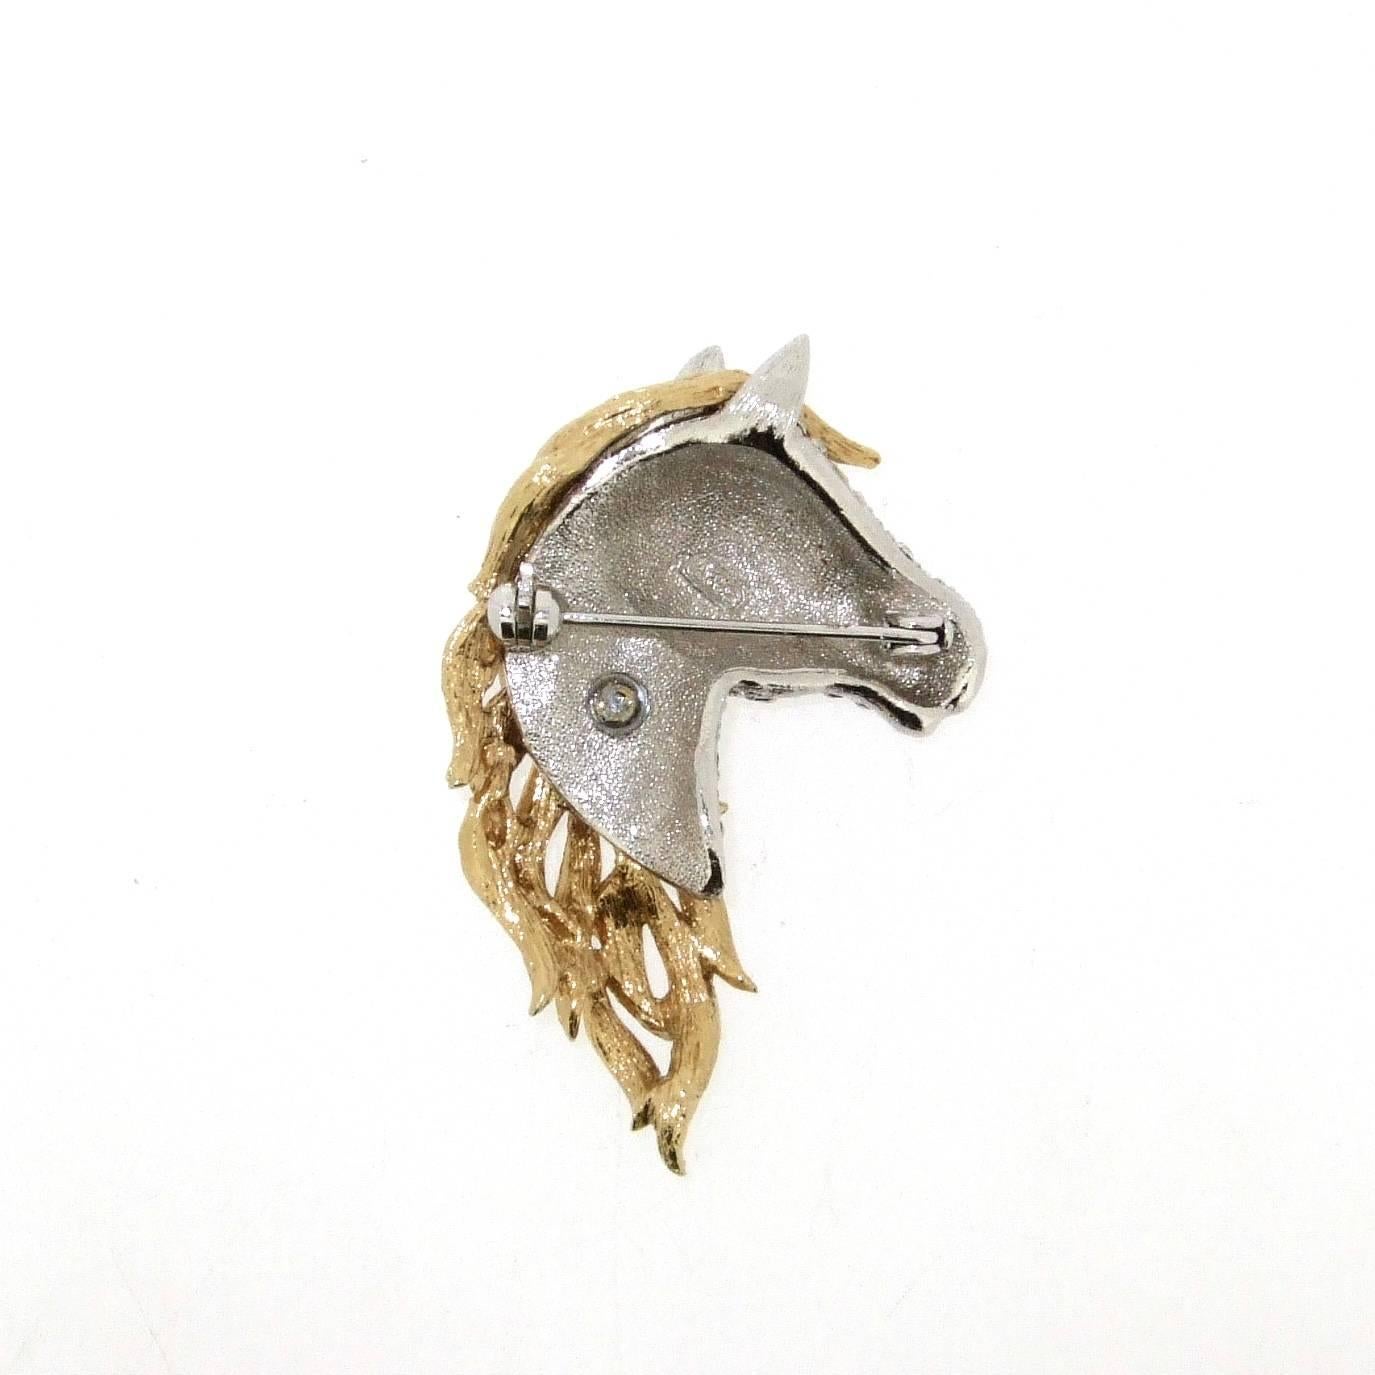 A stunning brooch of a horses head and mane by British jeweller Attwood & Sawyer in costume metal. Featuring a gold plated mane with crystal encrusted face. Stamped A&S on the back.